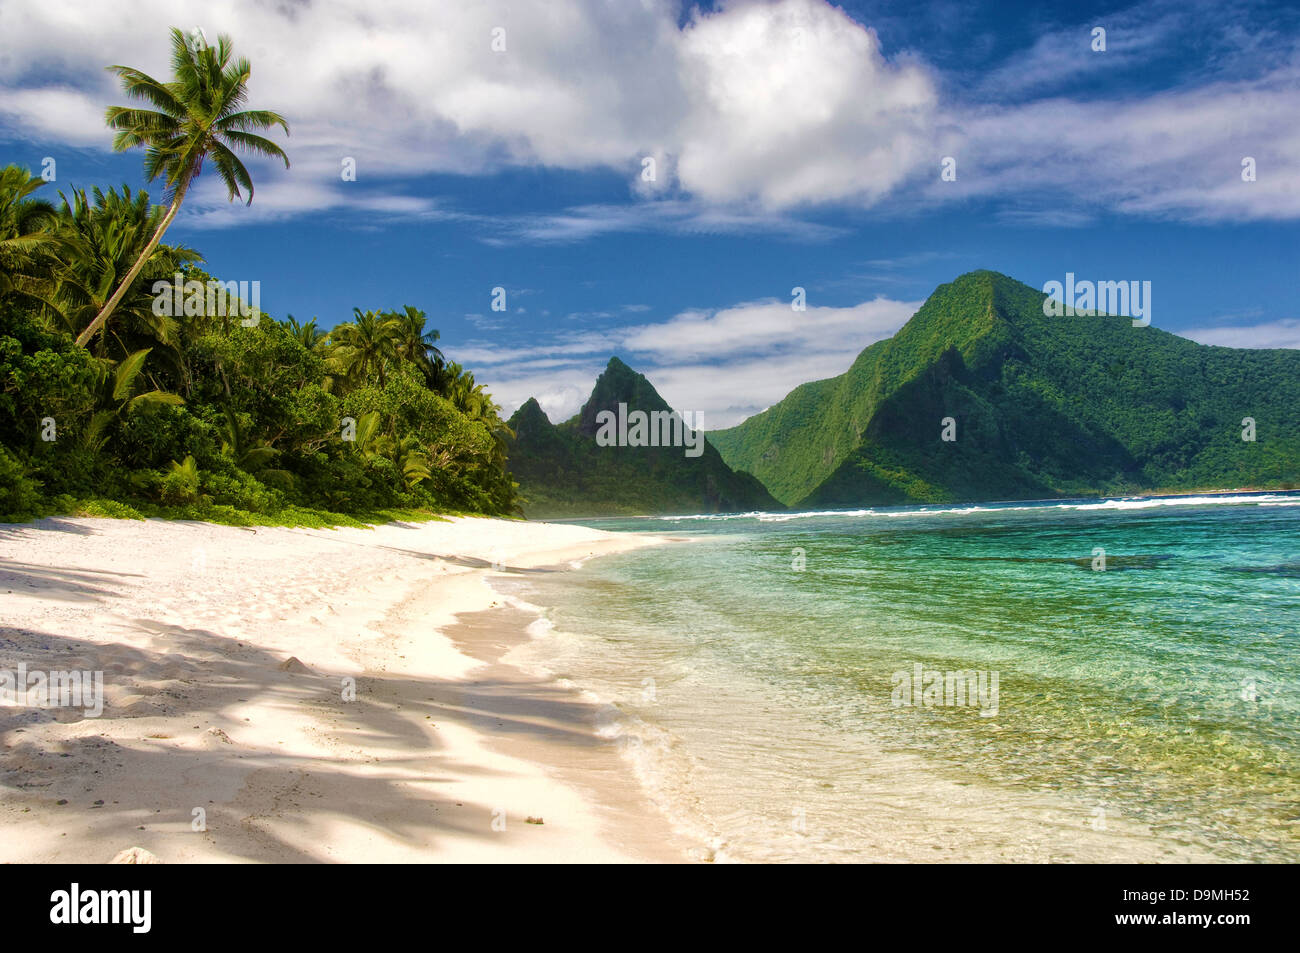 A secluded beach Si'u Point Trail on Ta'u Island in the American Samoa National Park. Part of the Manua volcanic island chain, Ta'u is sparsely populated and has miles of pristine beach. Stock Photo